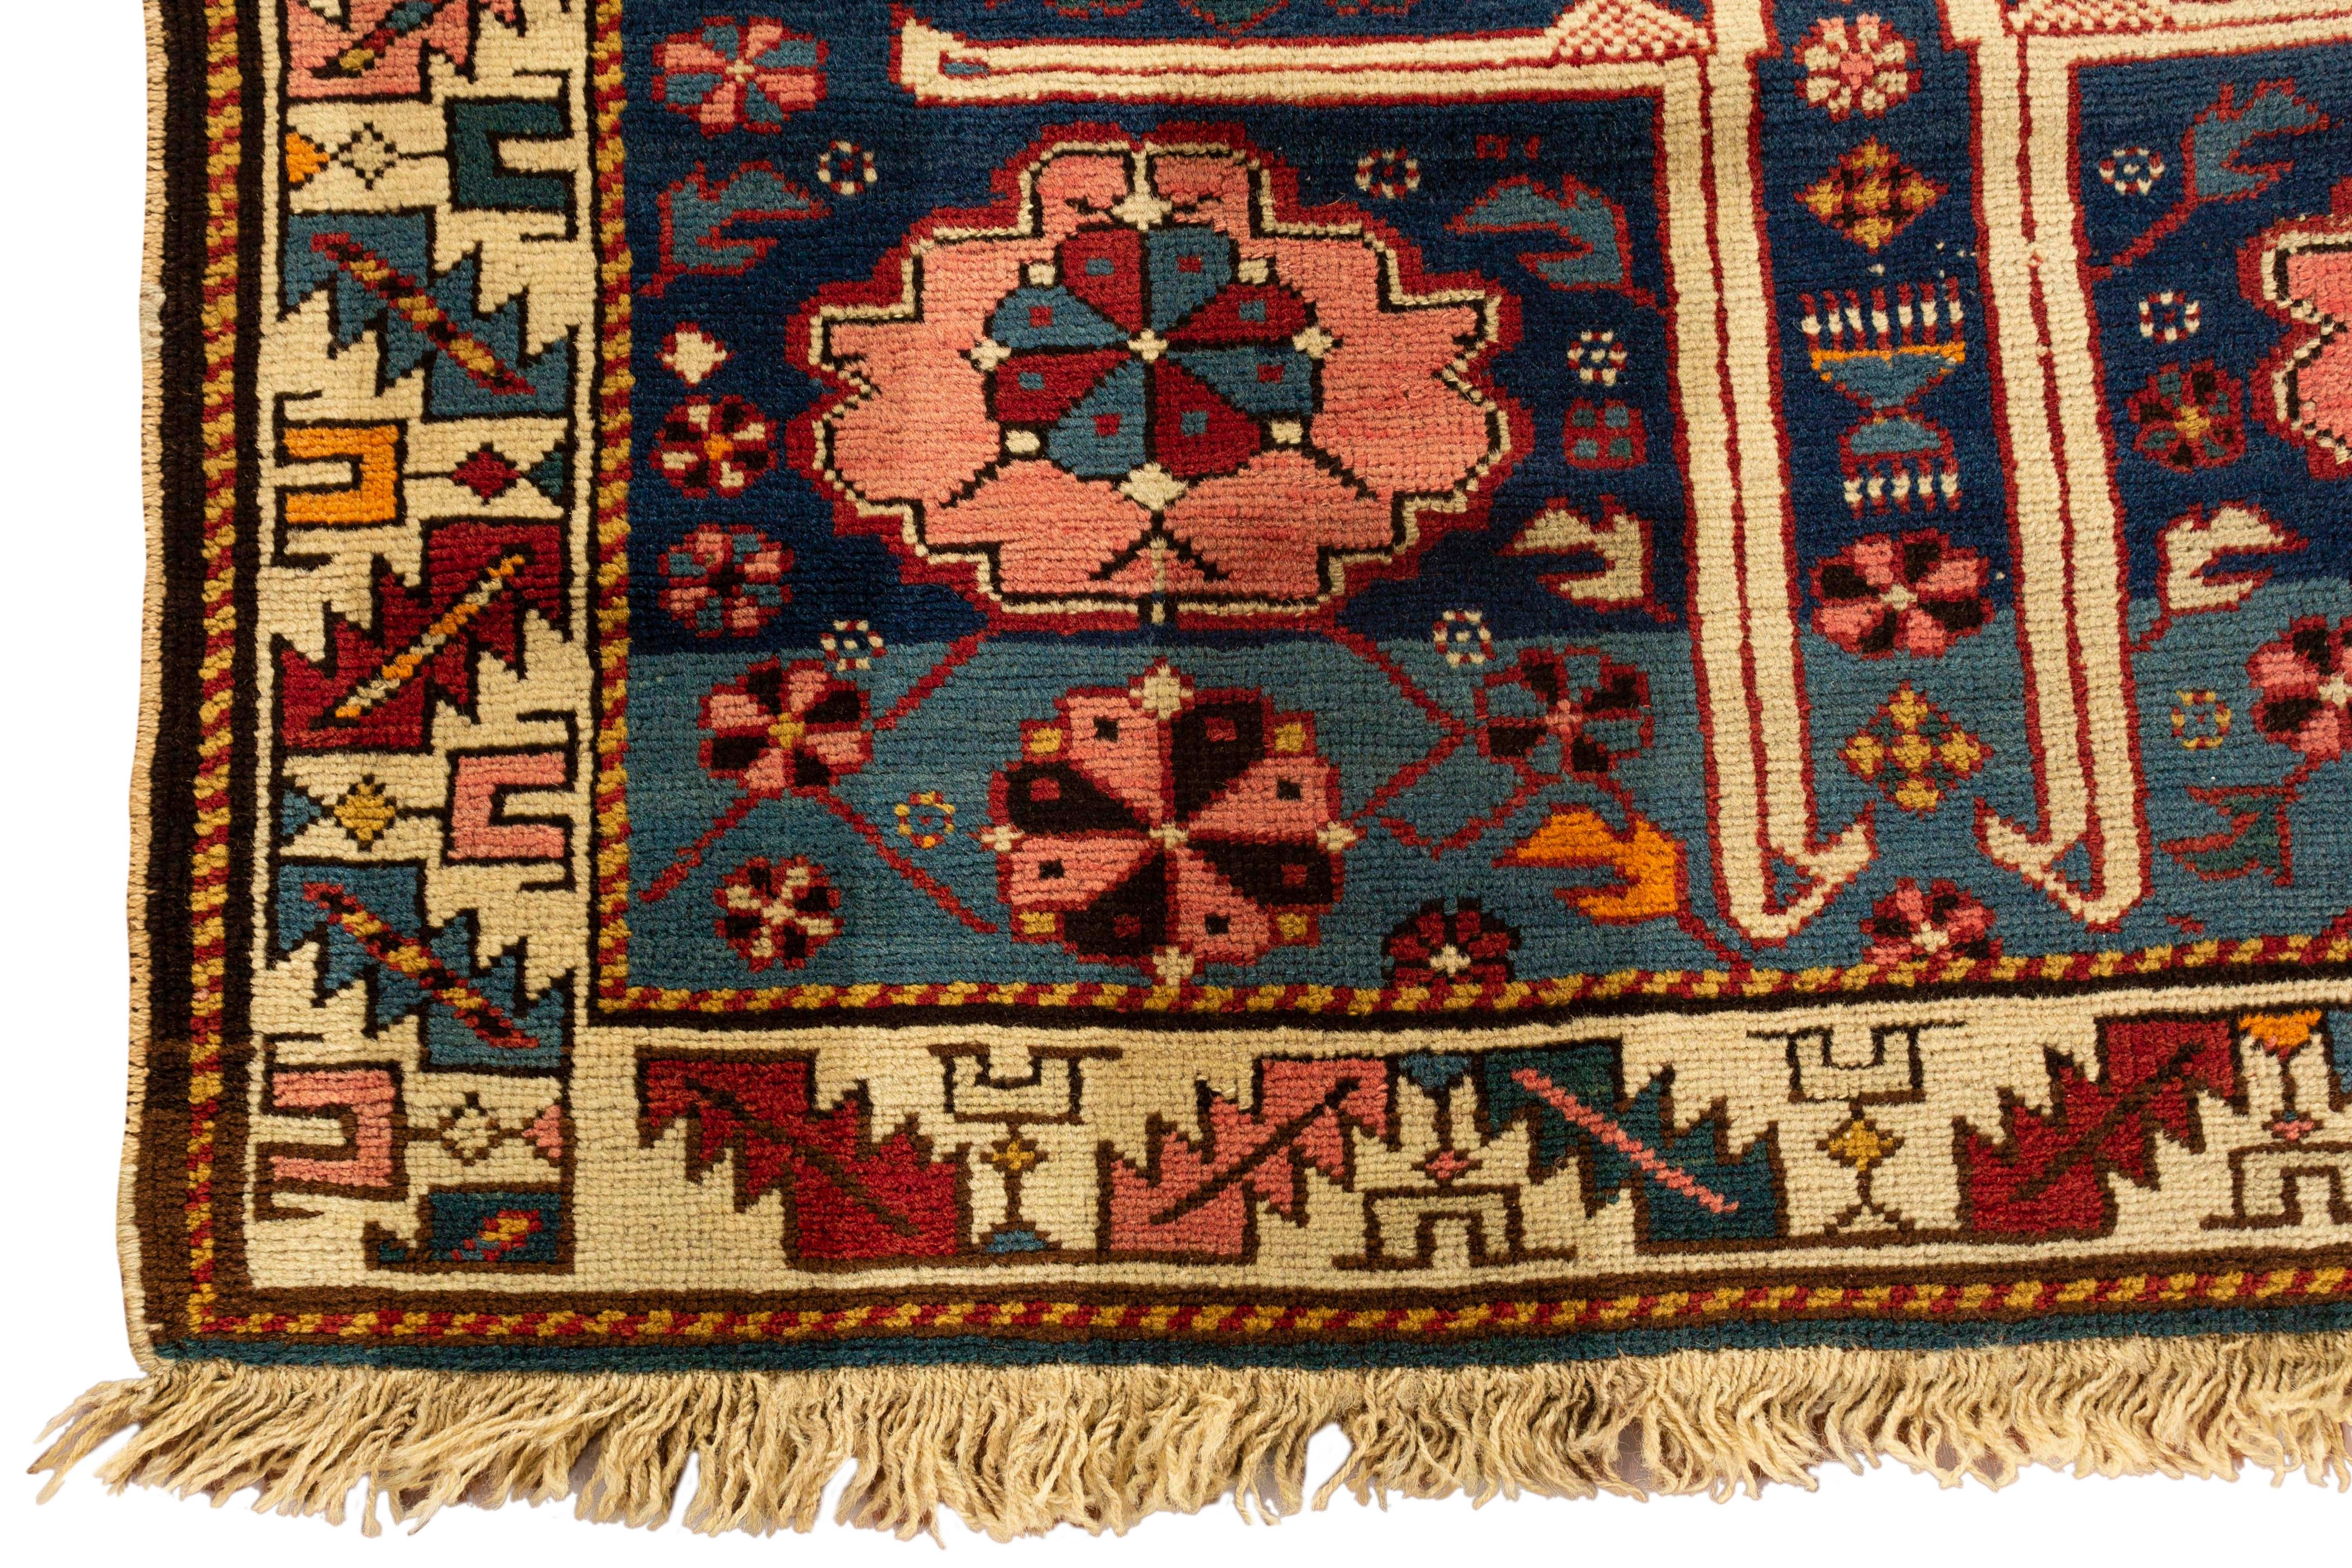 A Shirvan handwoven Caucasian rug circa 1920. These types of antique Caucasian rugs were woven in the eastern part of the region, mostly along the west coast of the Caspian Sea and show in the design, the ethnic style associated with Caucasian